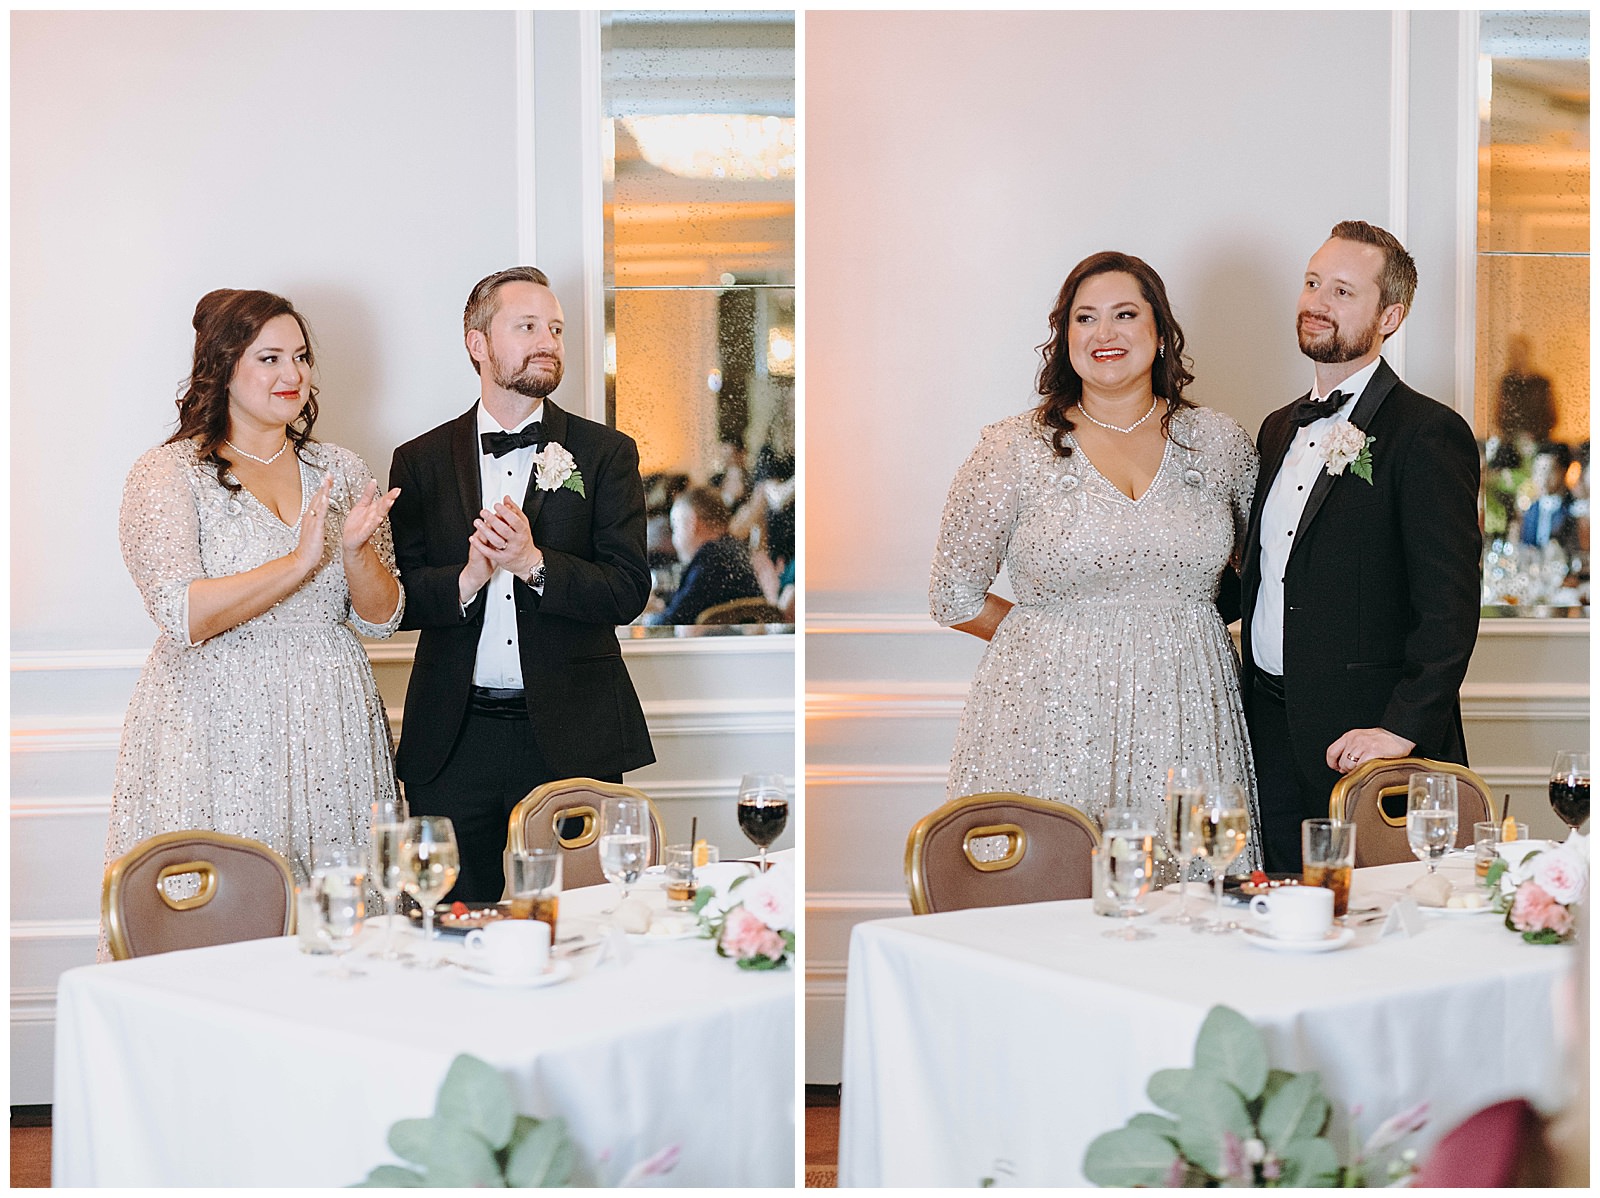 Dupont Circle Hotel Wedding bride and groom speeches